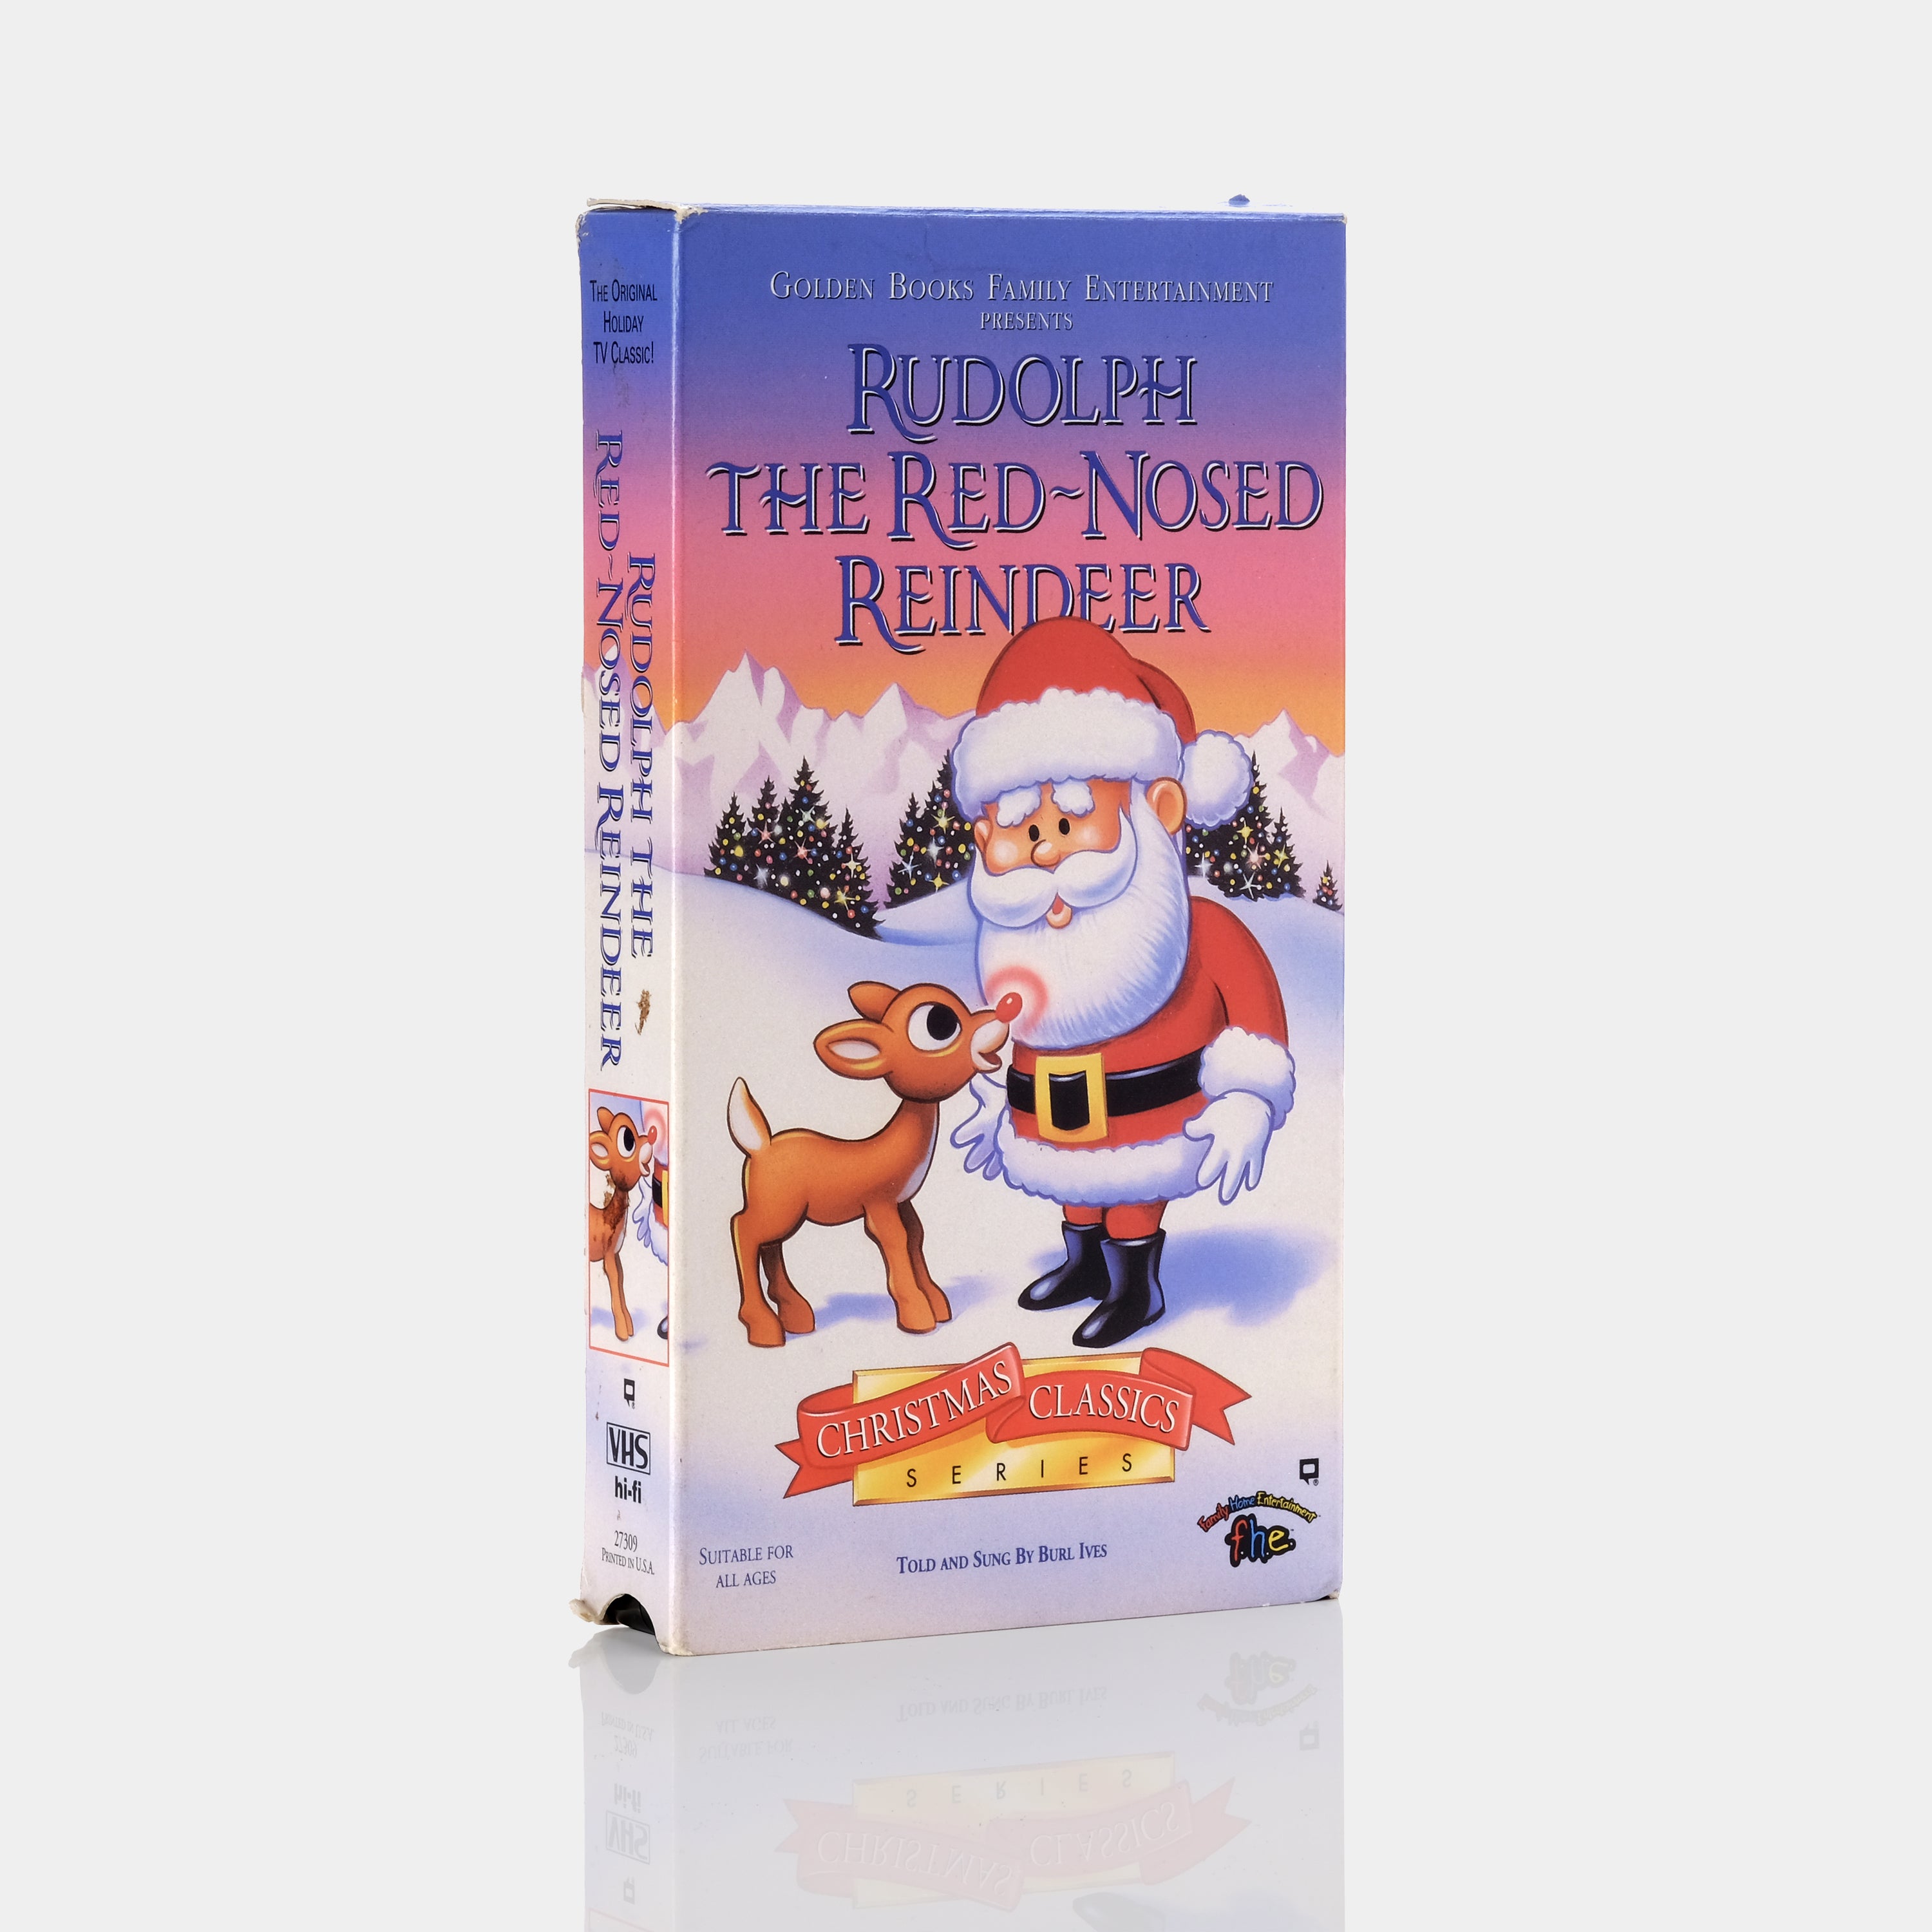 Rudolph the Red-Nosed Reindeer VHS Tape